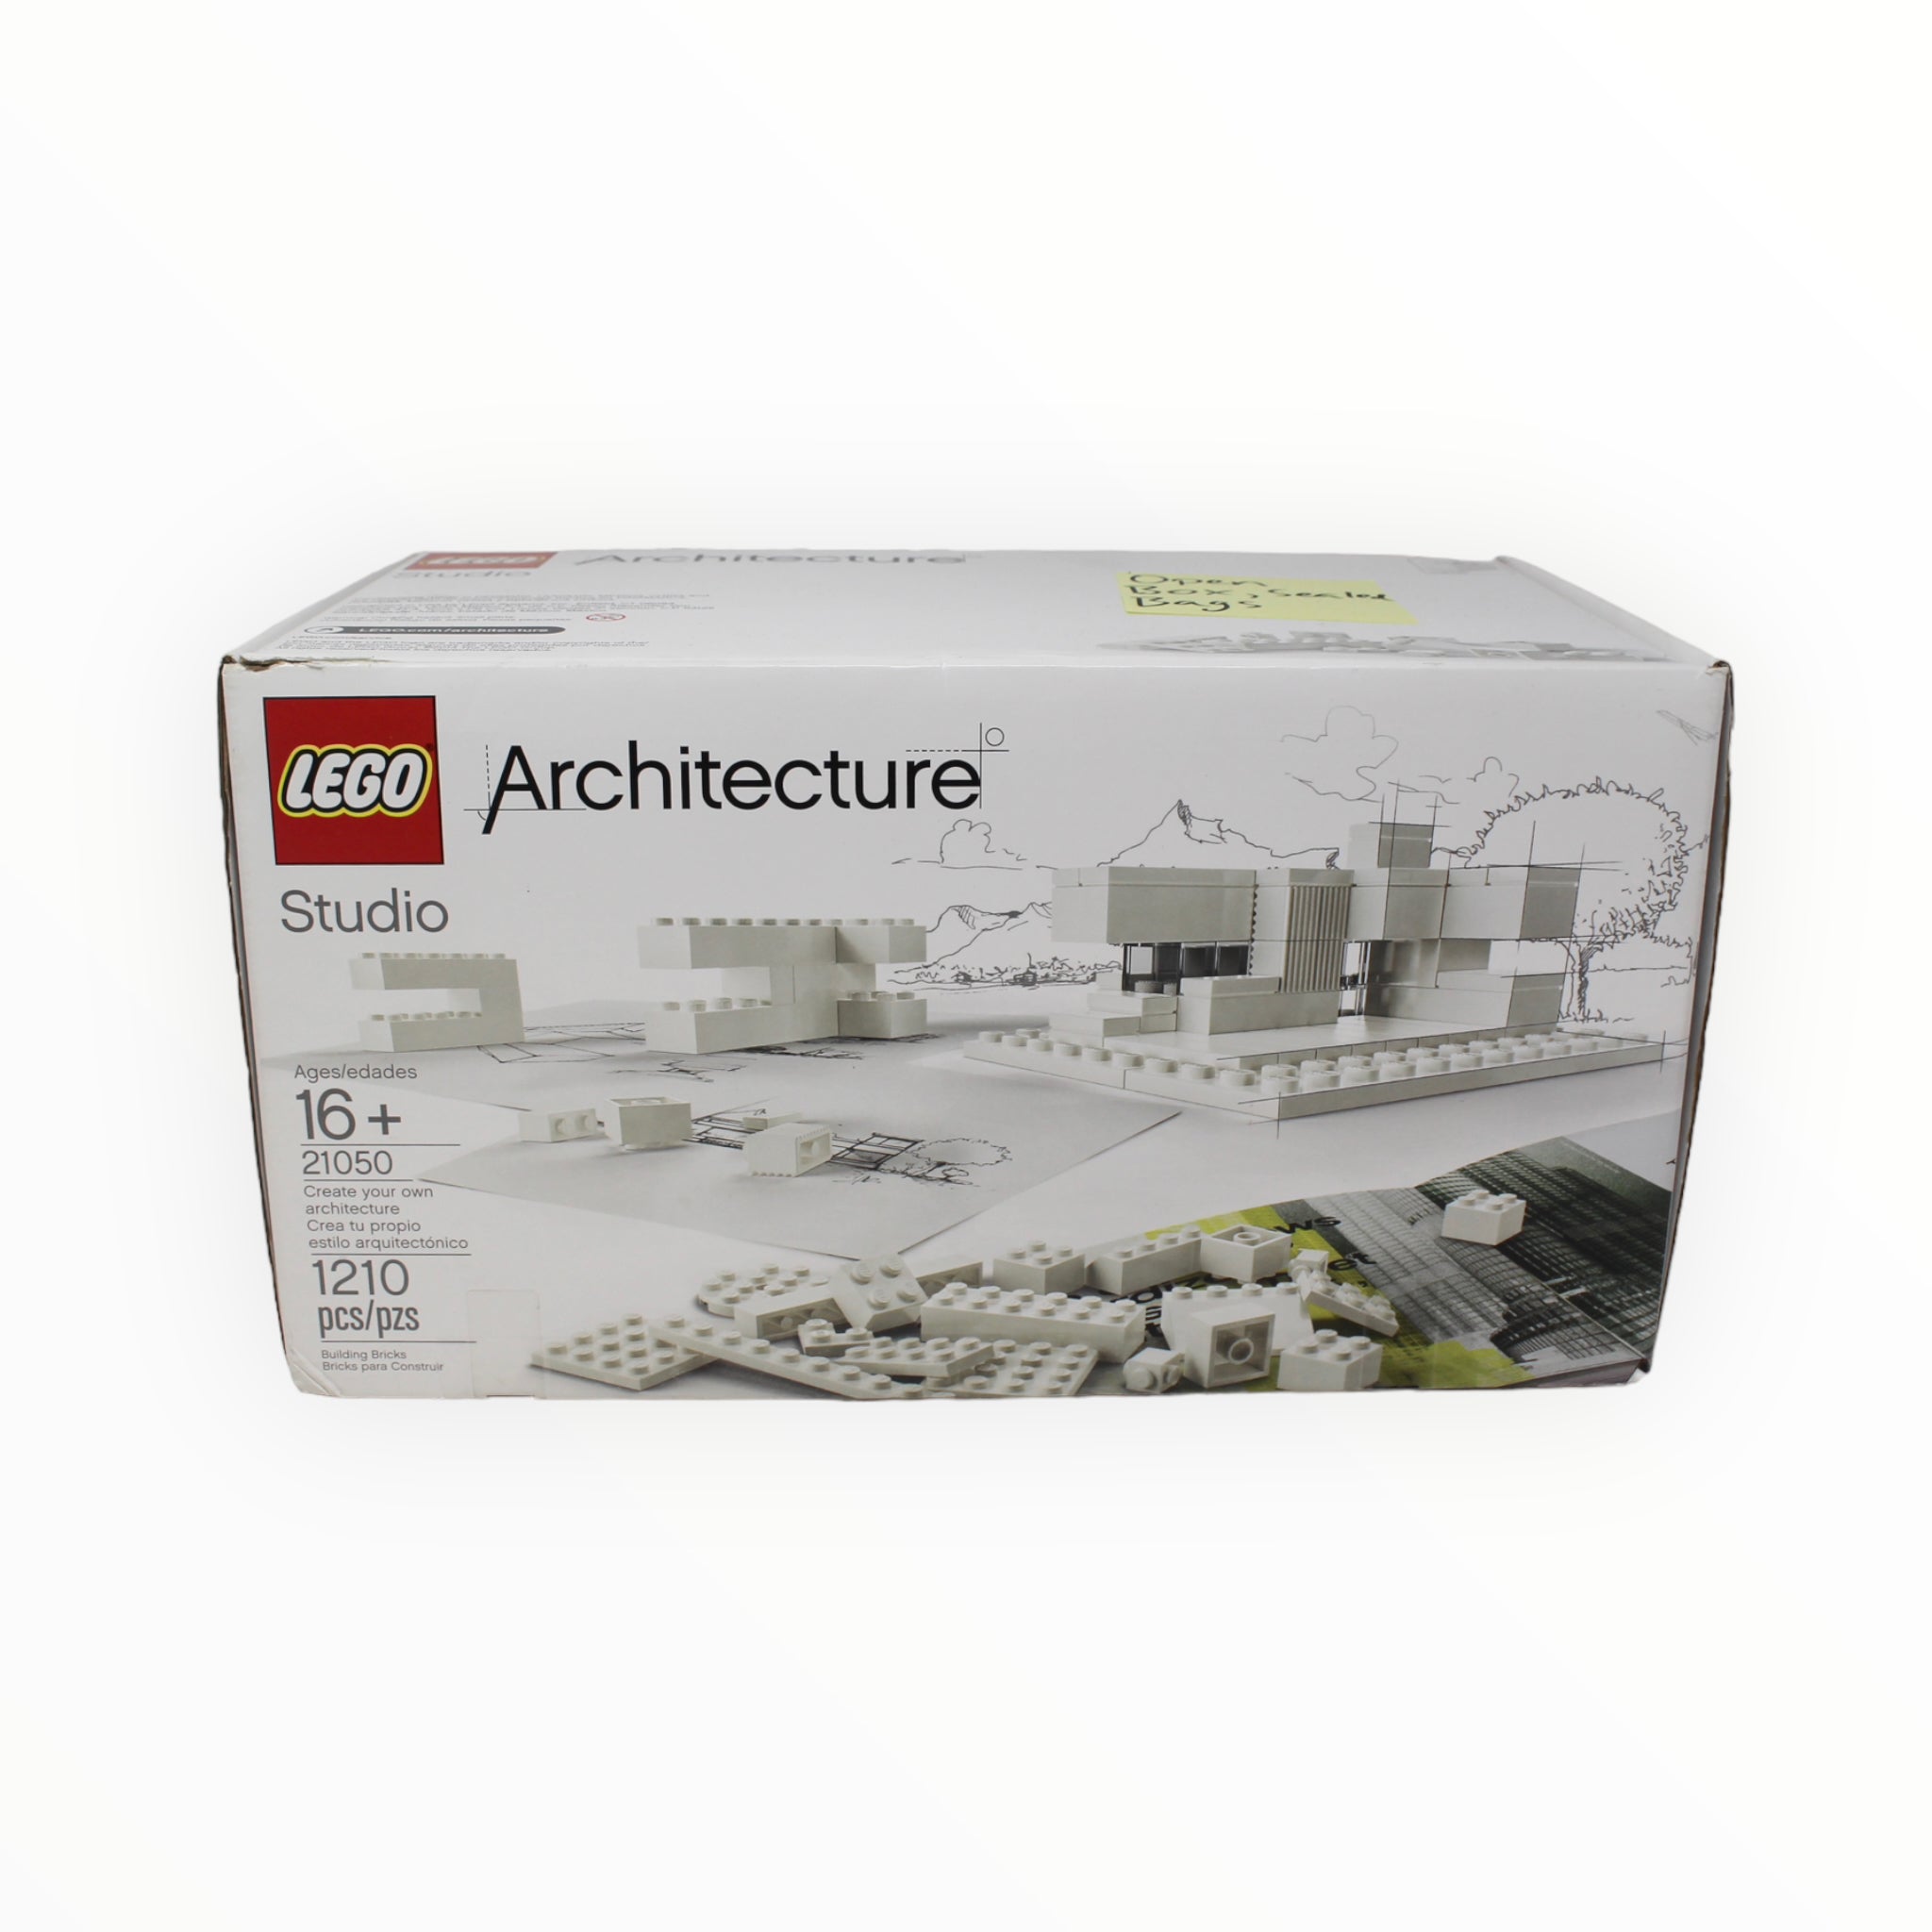 Certified Used Set 21050 Architecture Studio Create your own architecture  (open box, sealed bags)